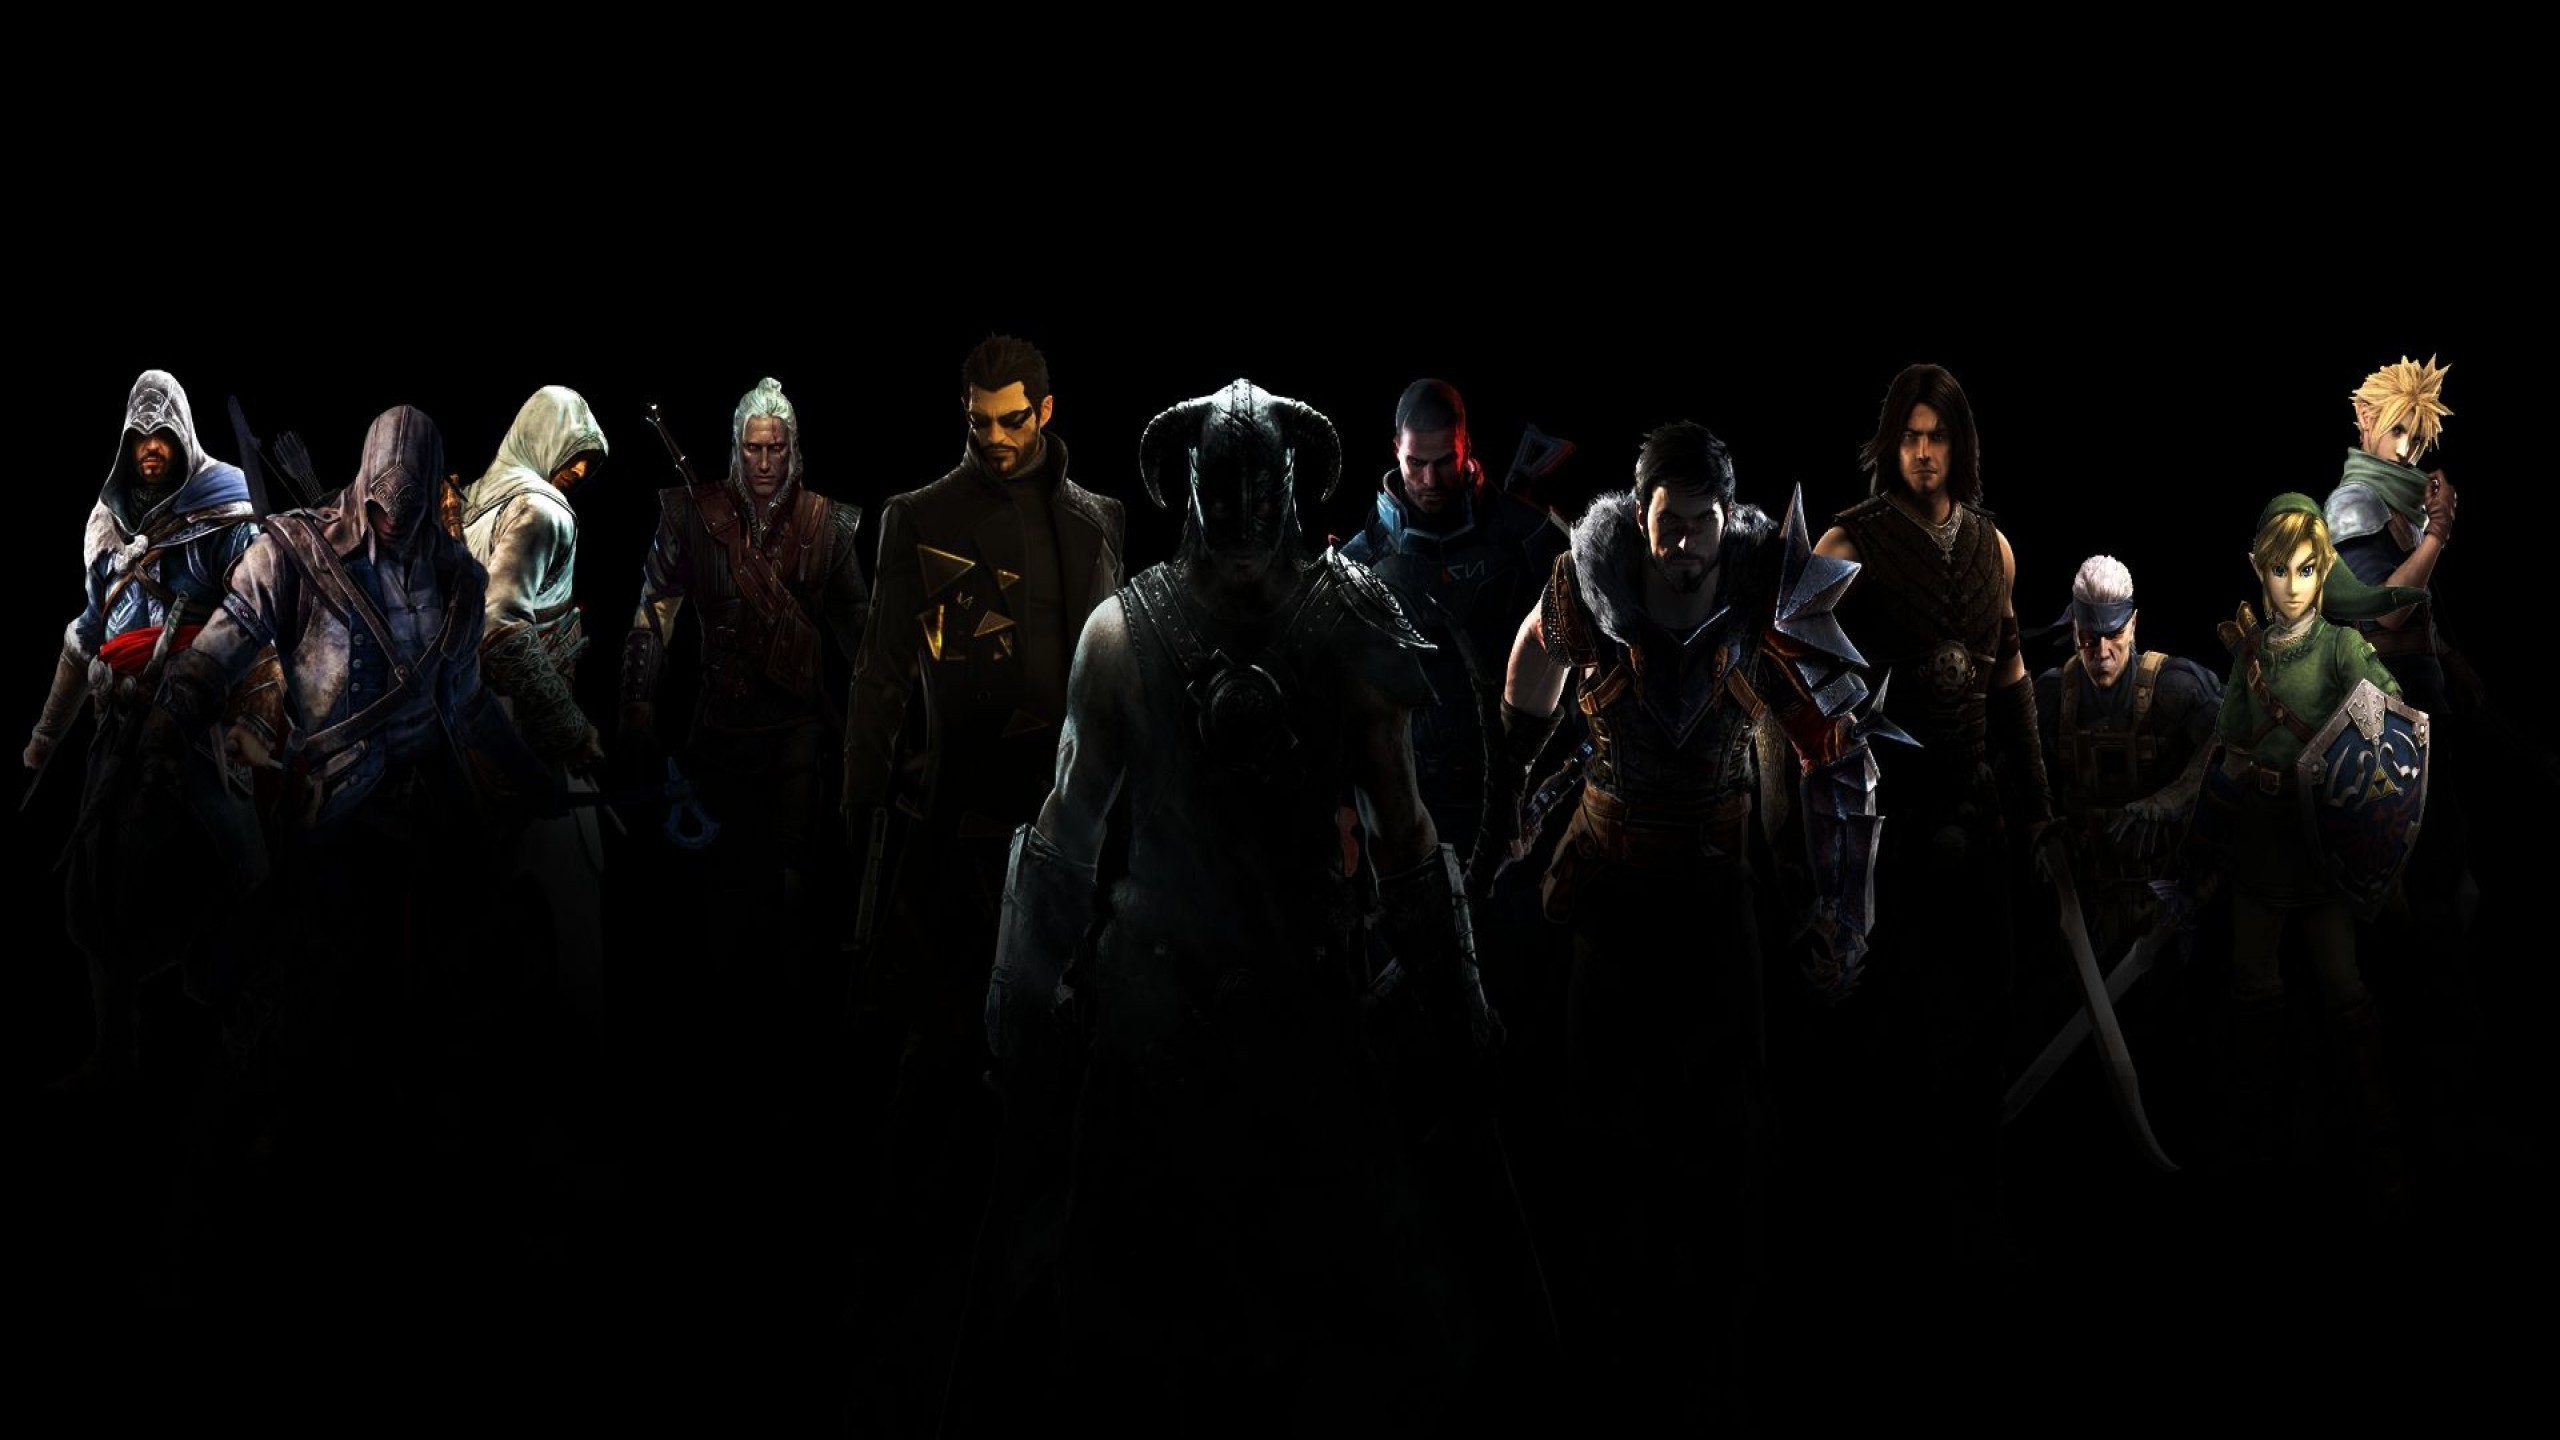 Download Game protagonists wallpaper 2560x1440